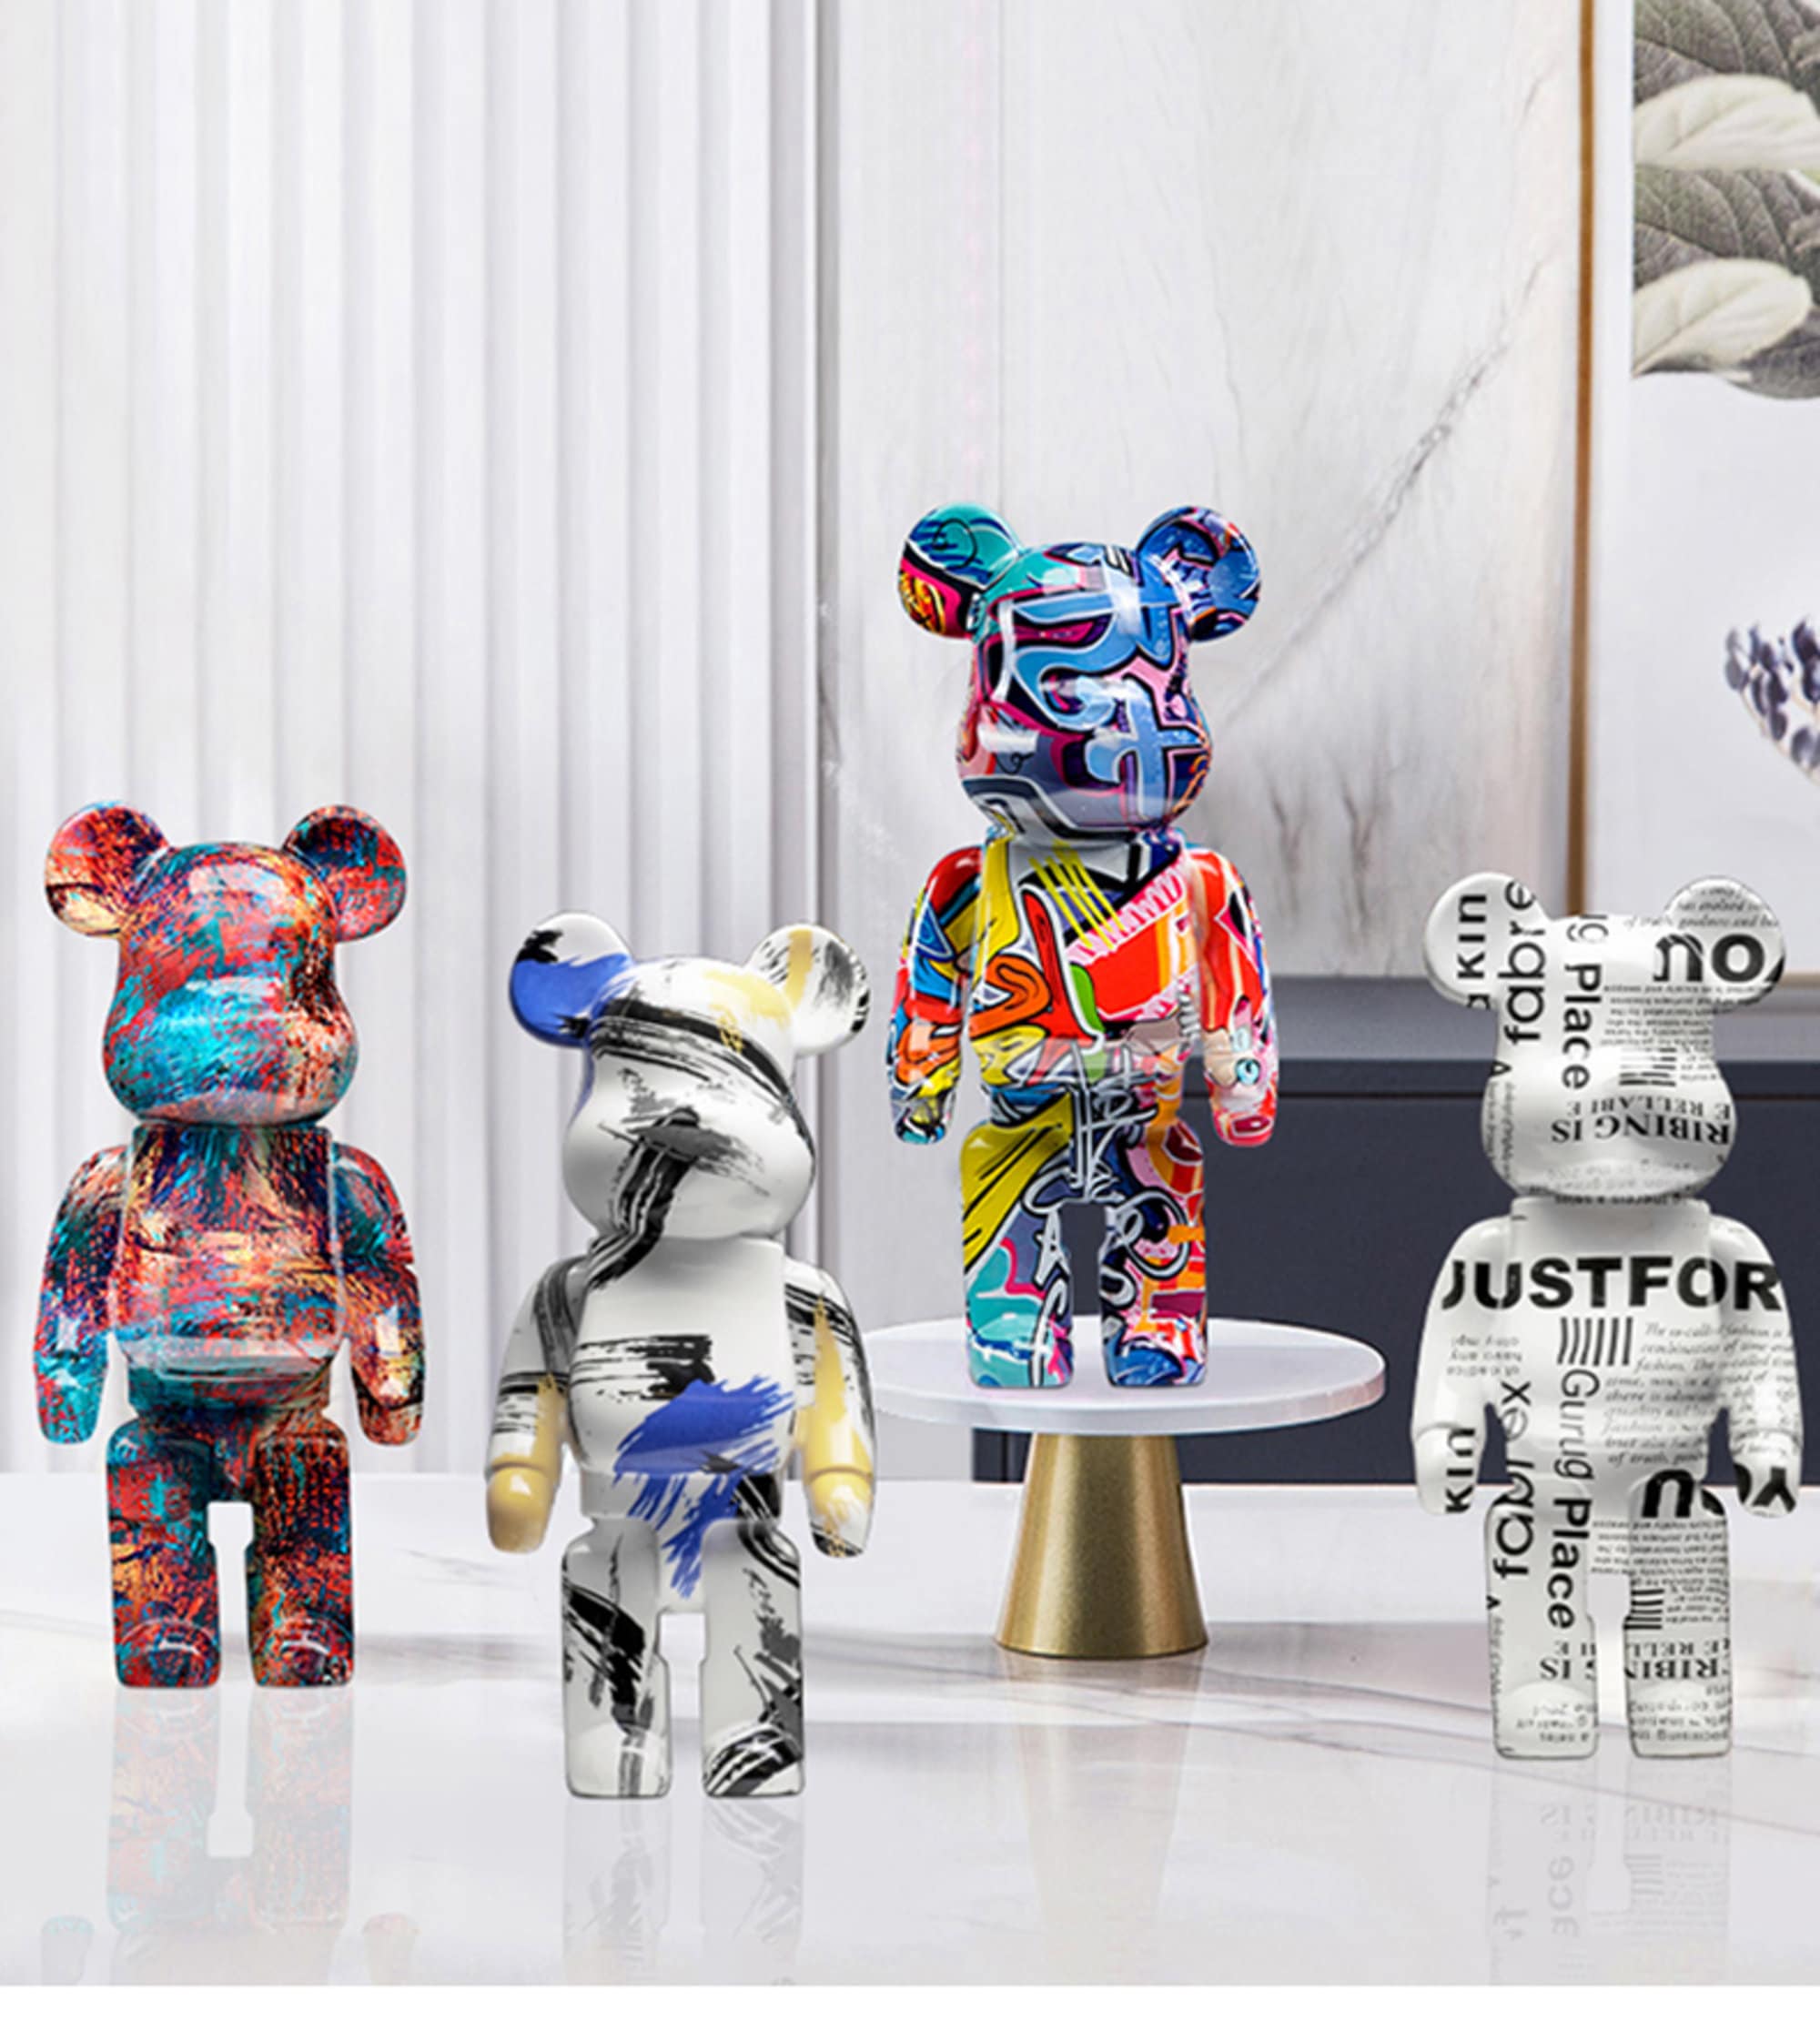 Customized SUPREME Bearbrick 1000%, Luxury, Accessories on Carousell